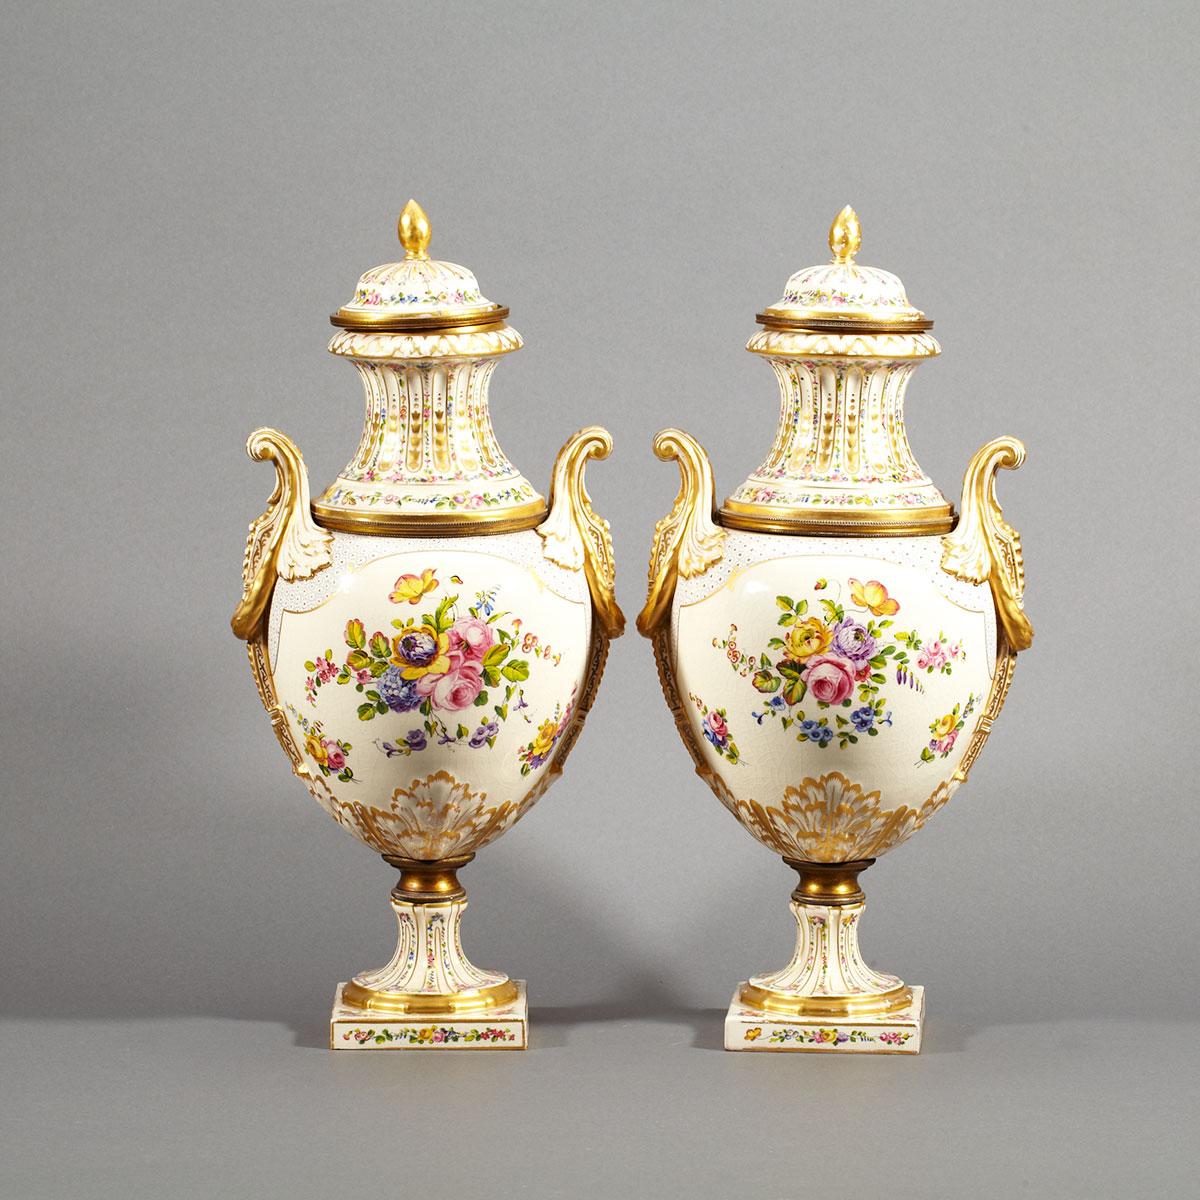 Pair of ‘Sèvres’ Covered Mantel Urns, early 20th century